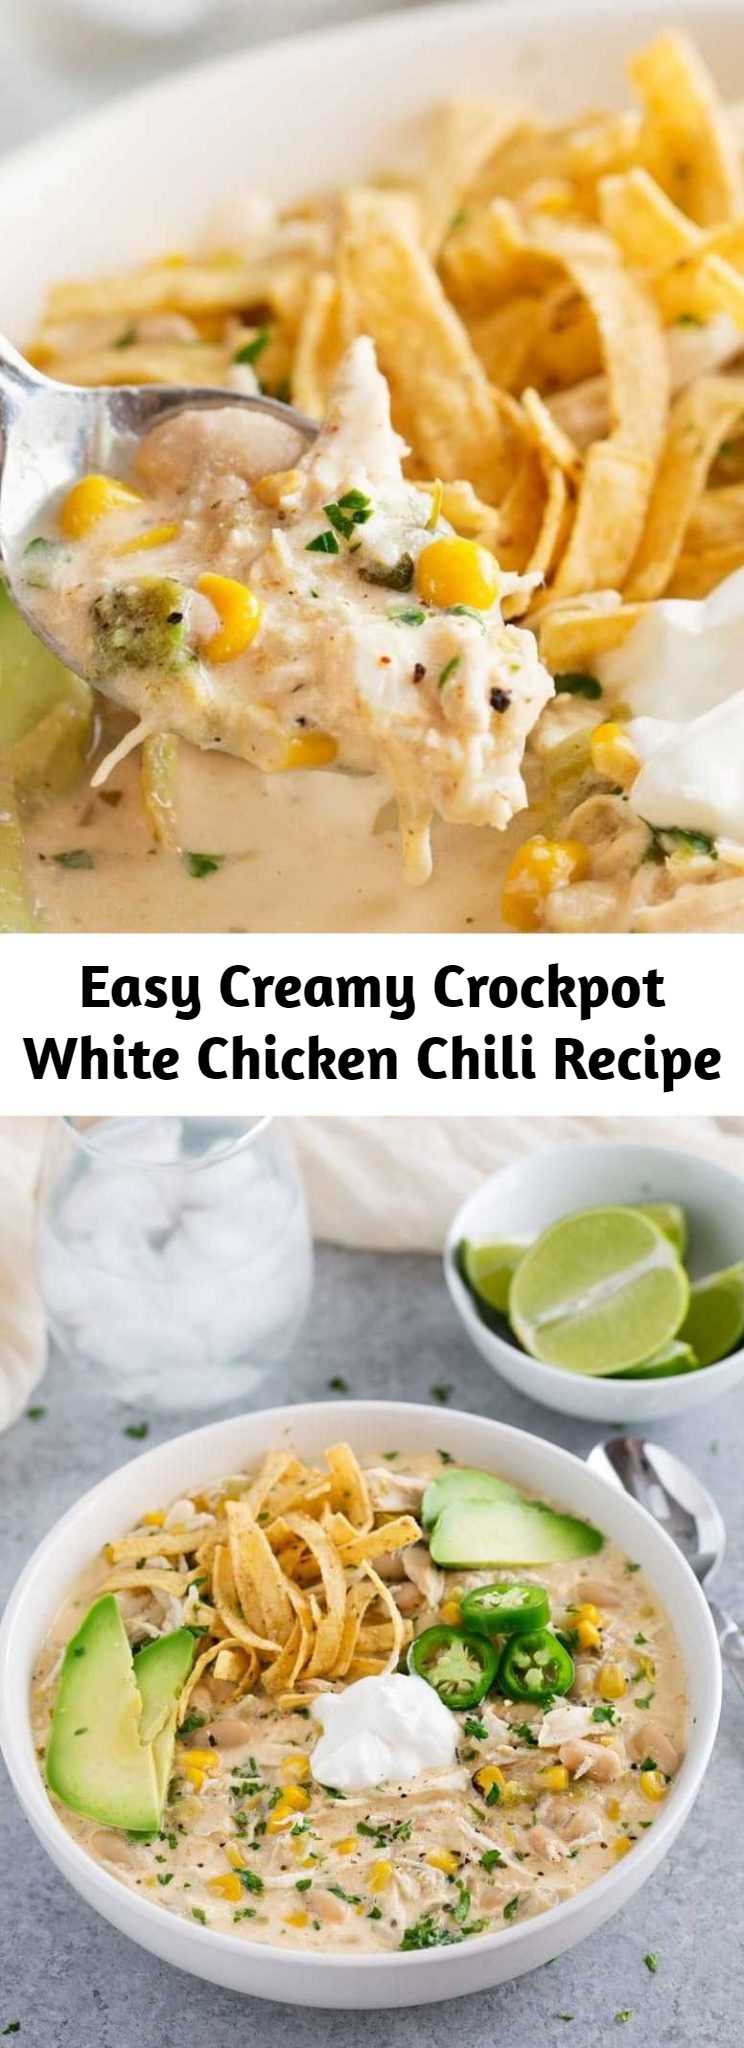 Easy Creamy Crockpot White Chicken Chili Recipe - This creamy white chicken chili is made super easy in your crockpot! Creamy with plenty of spice, it's the perfect companion on a chilly night!